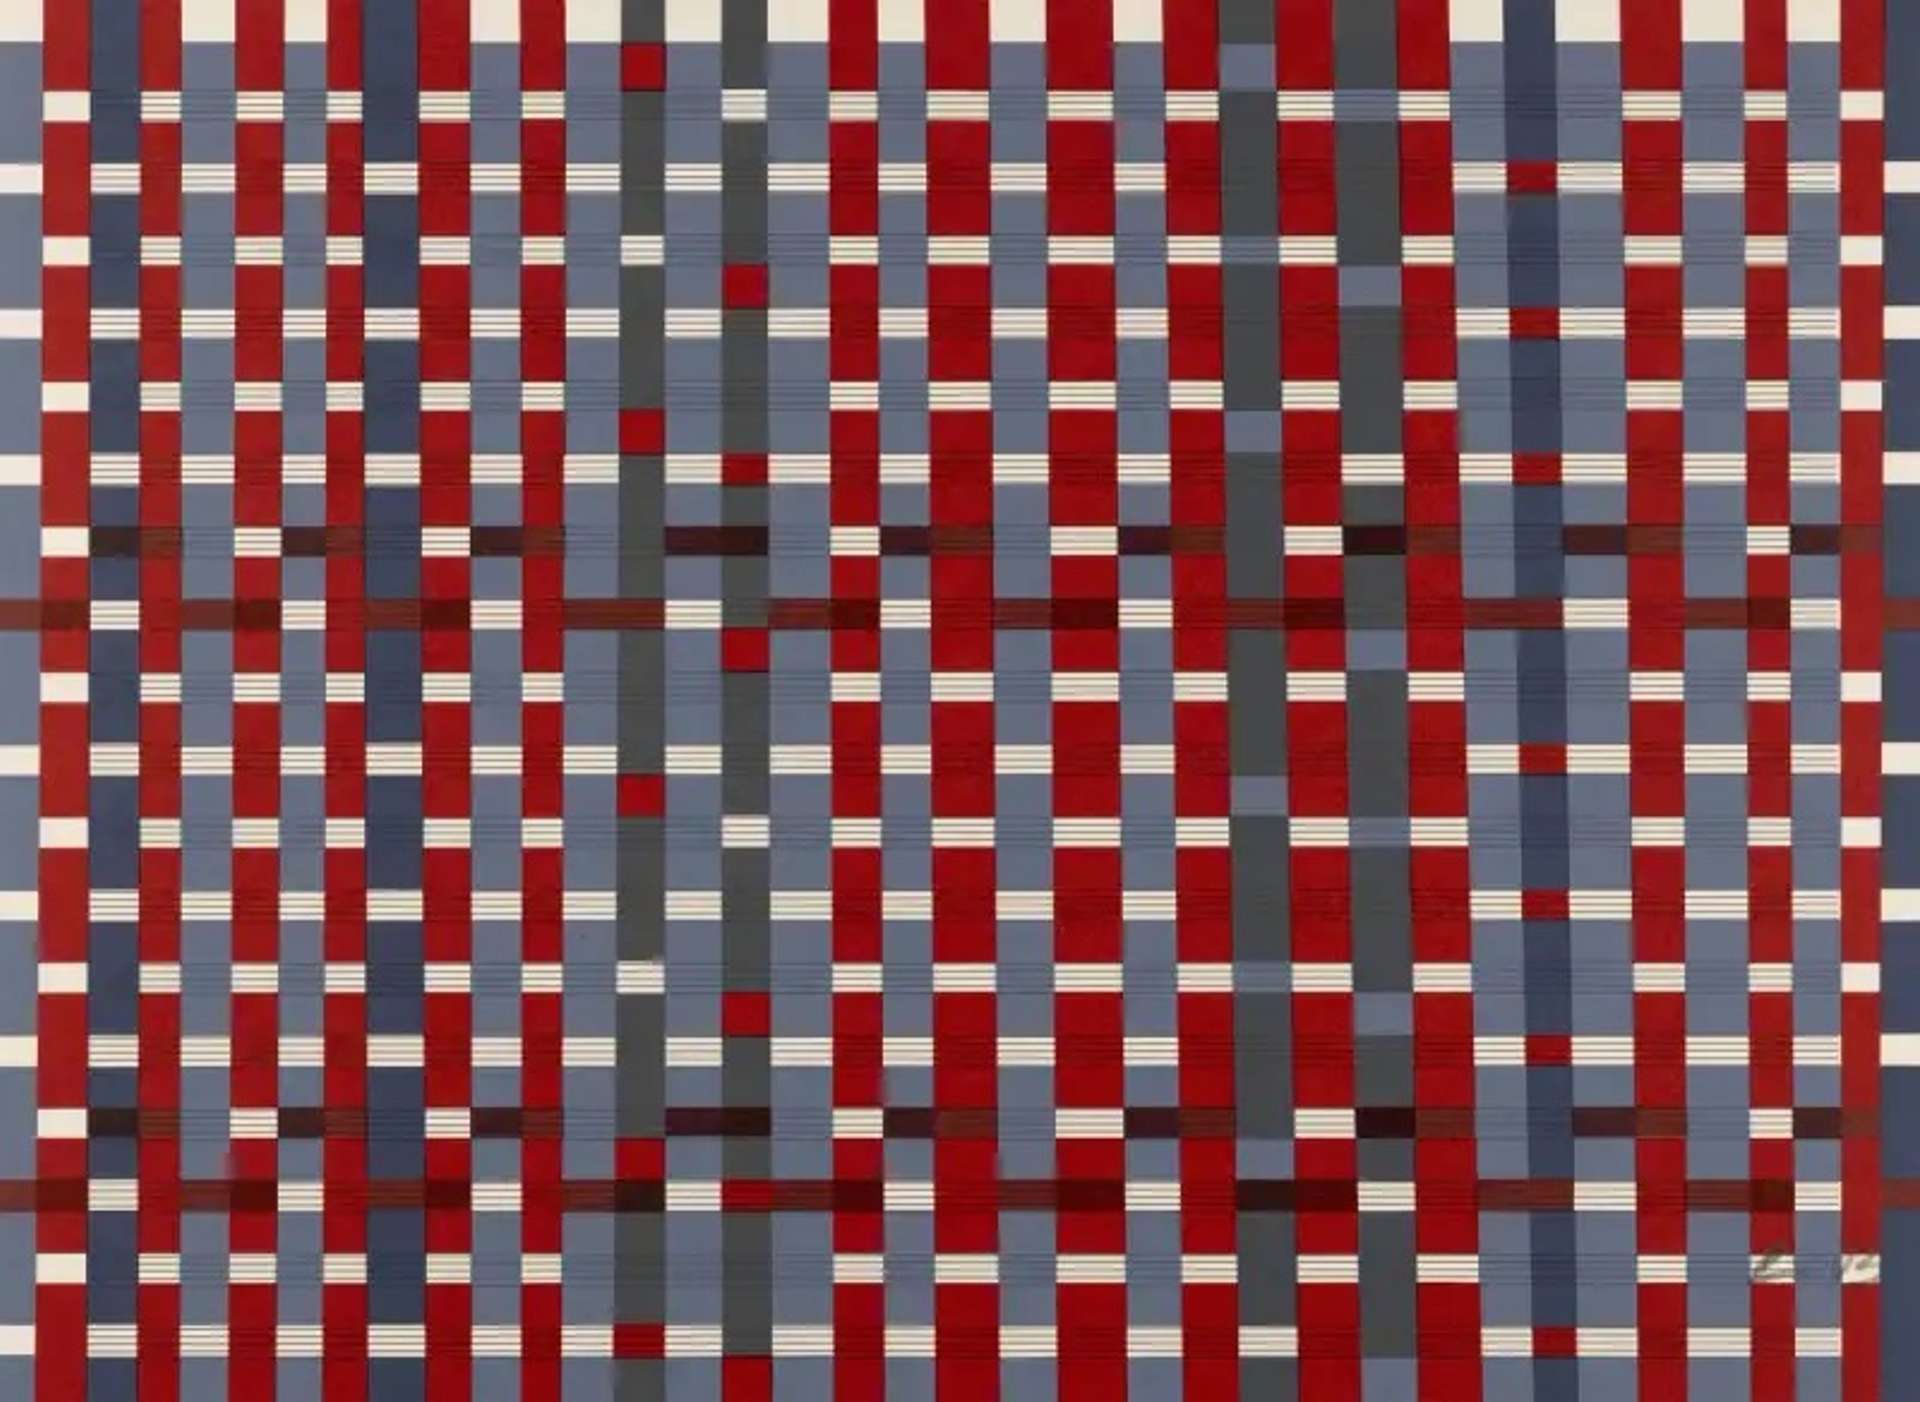 Louise Bourgeois’ Untitled #19. A screenprint of red, blue, and grey tones against a pattern of horizontal lines